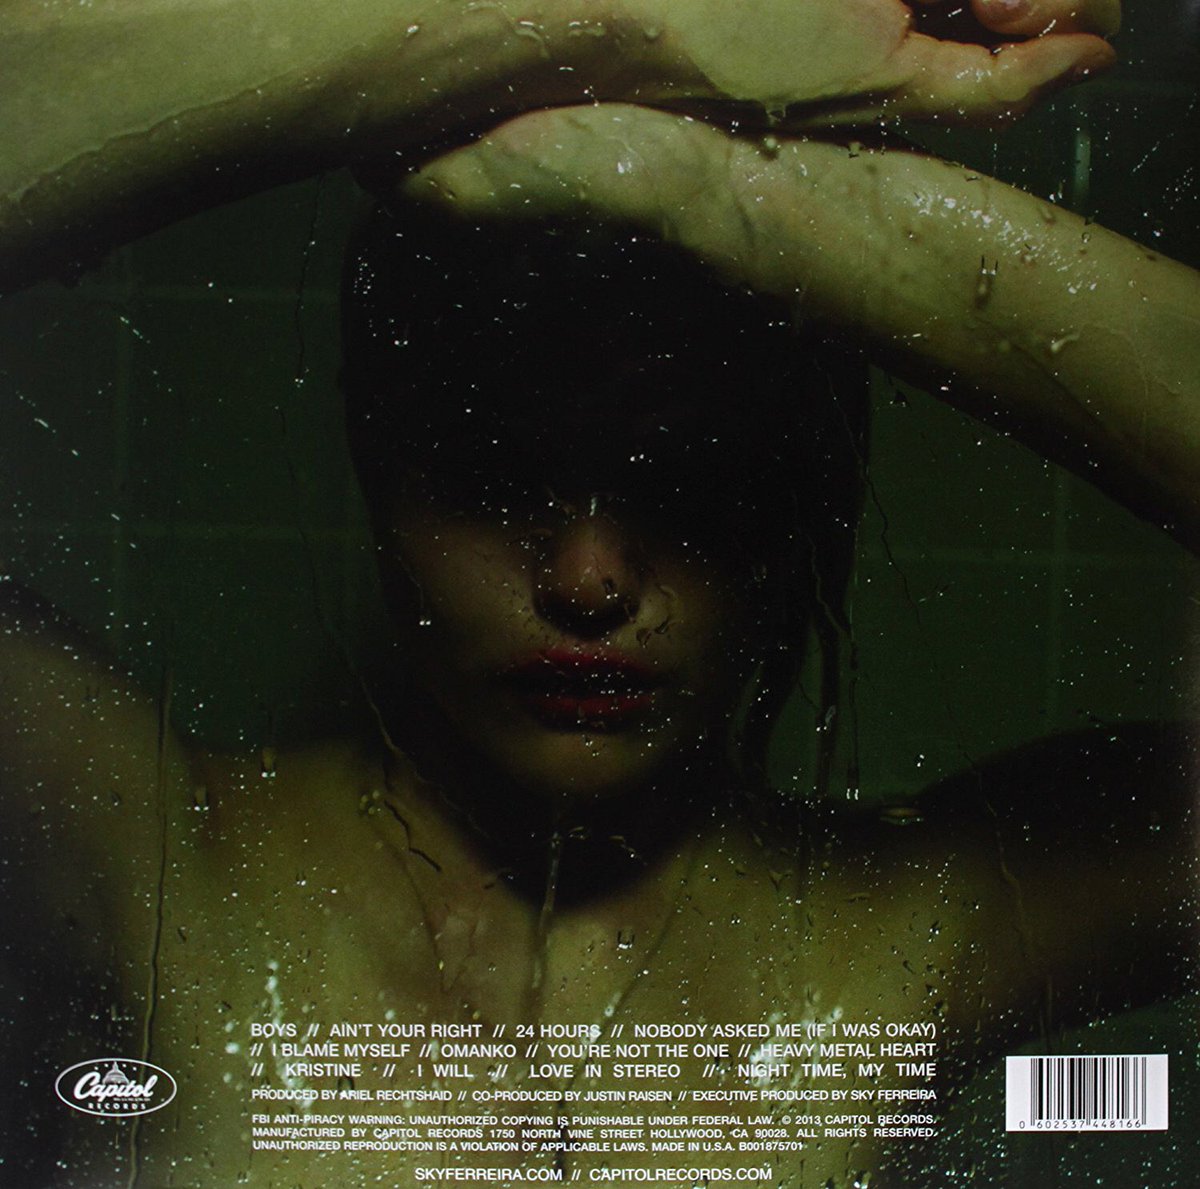 Sky Ferreira Updates on X: 4 yrs ago today Sky Ferreira released her  critically acclaimed debut 'Night Time, My Time'. It has gone on to sell  100k and 50m+ streams WW!  /